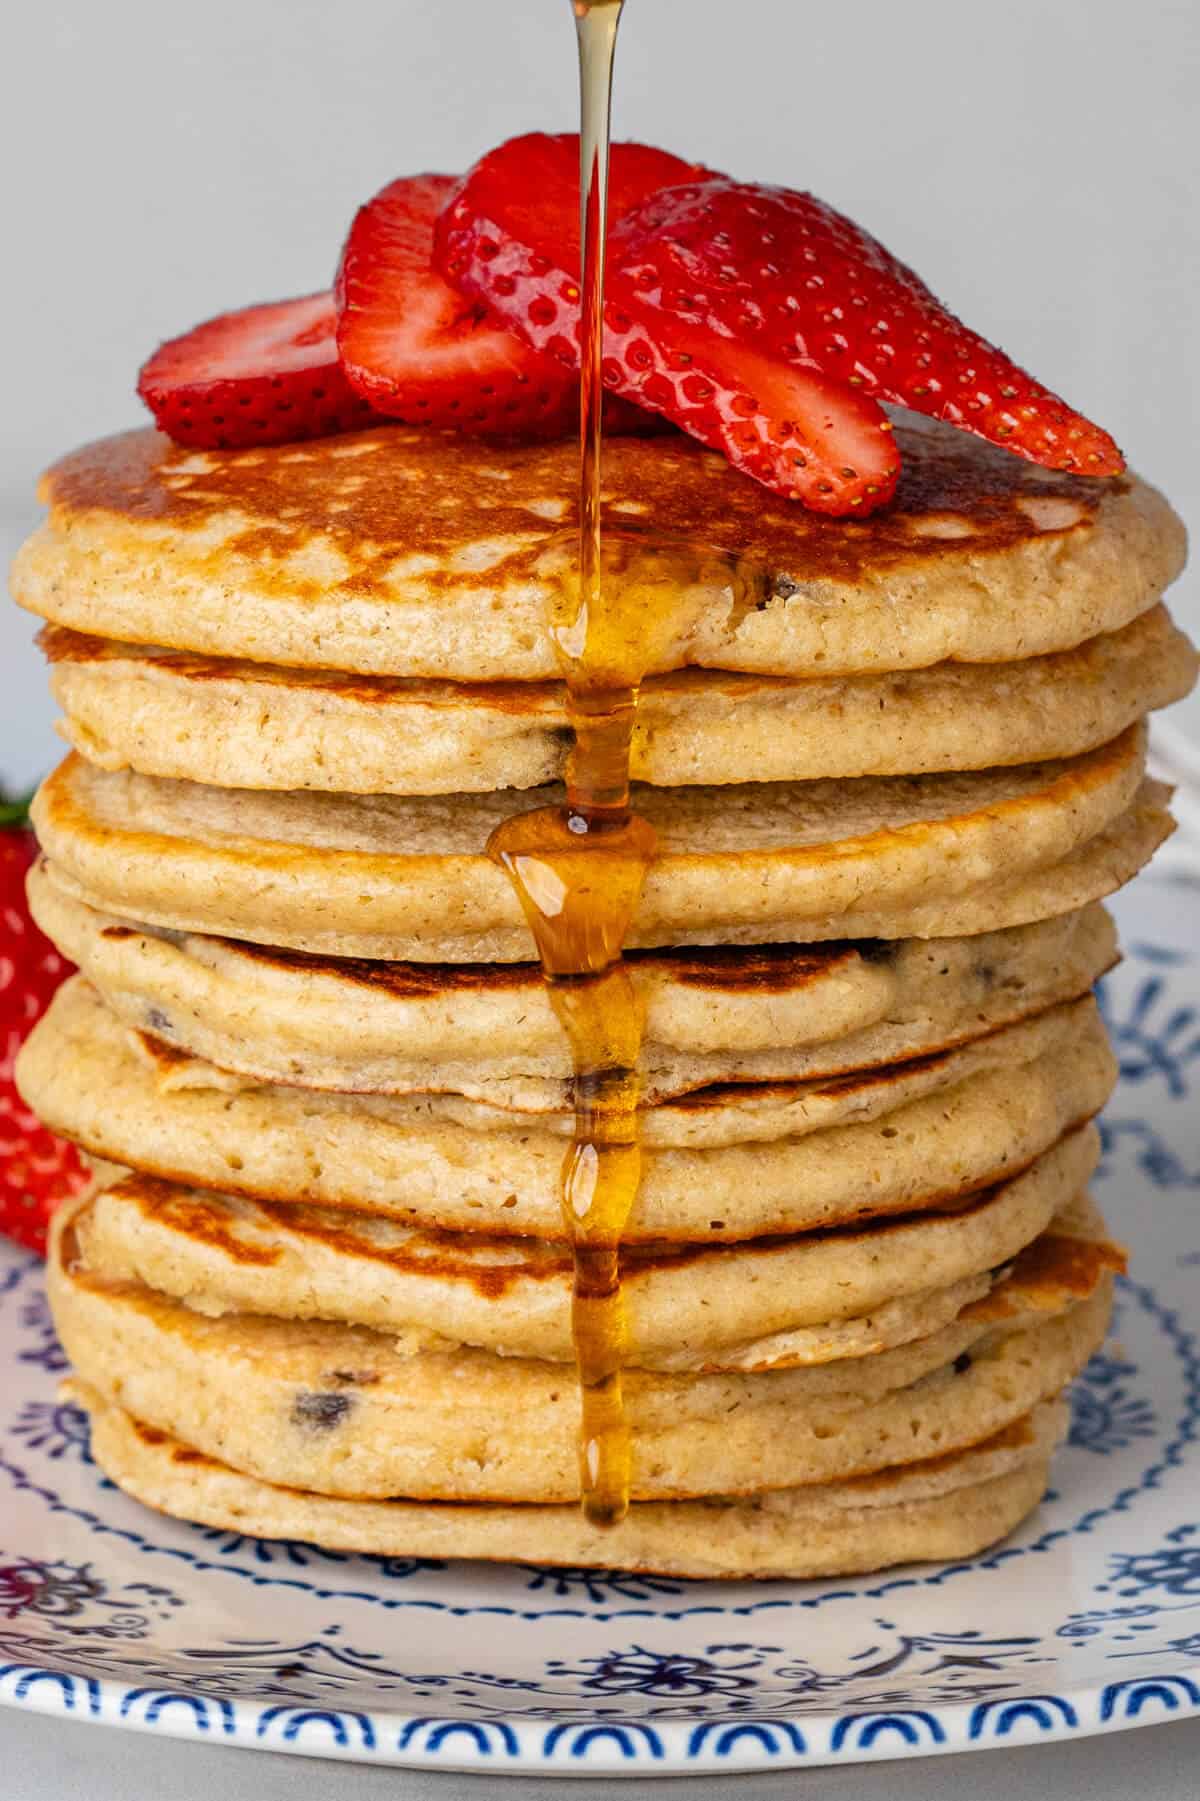 Maple syrup being poured on a stack of Oat Flour Pancakes